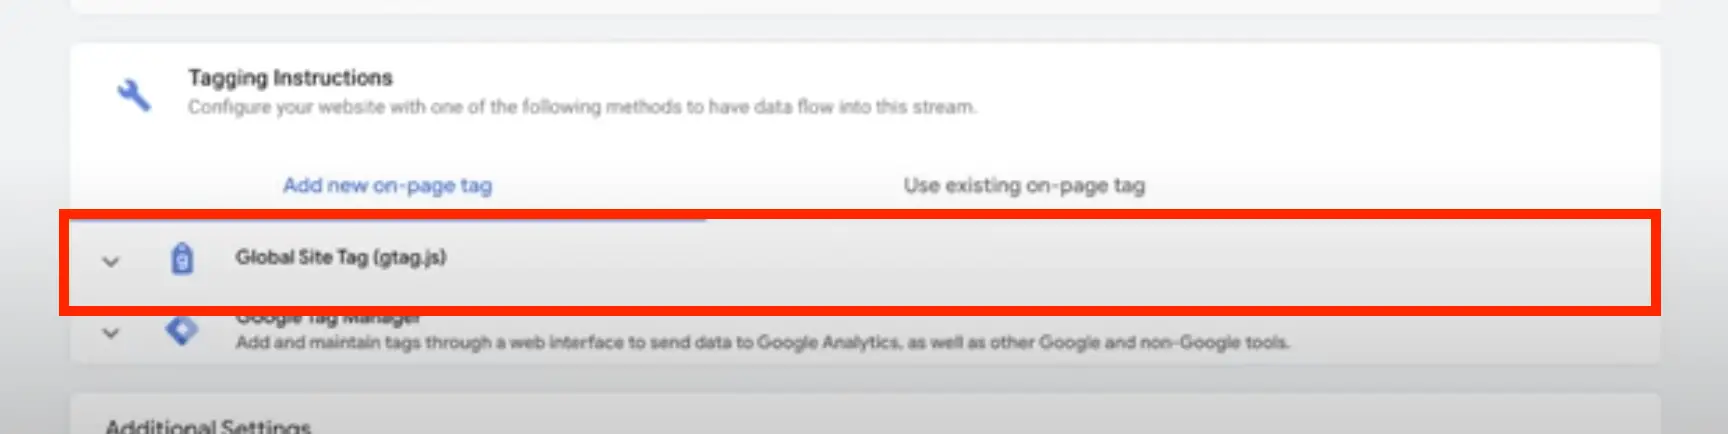 Screenshot of Global site tag for Google Analytics 4.0